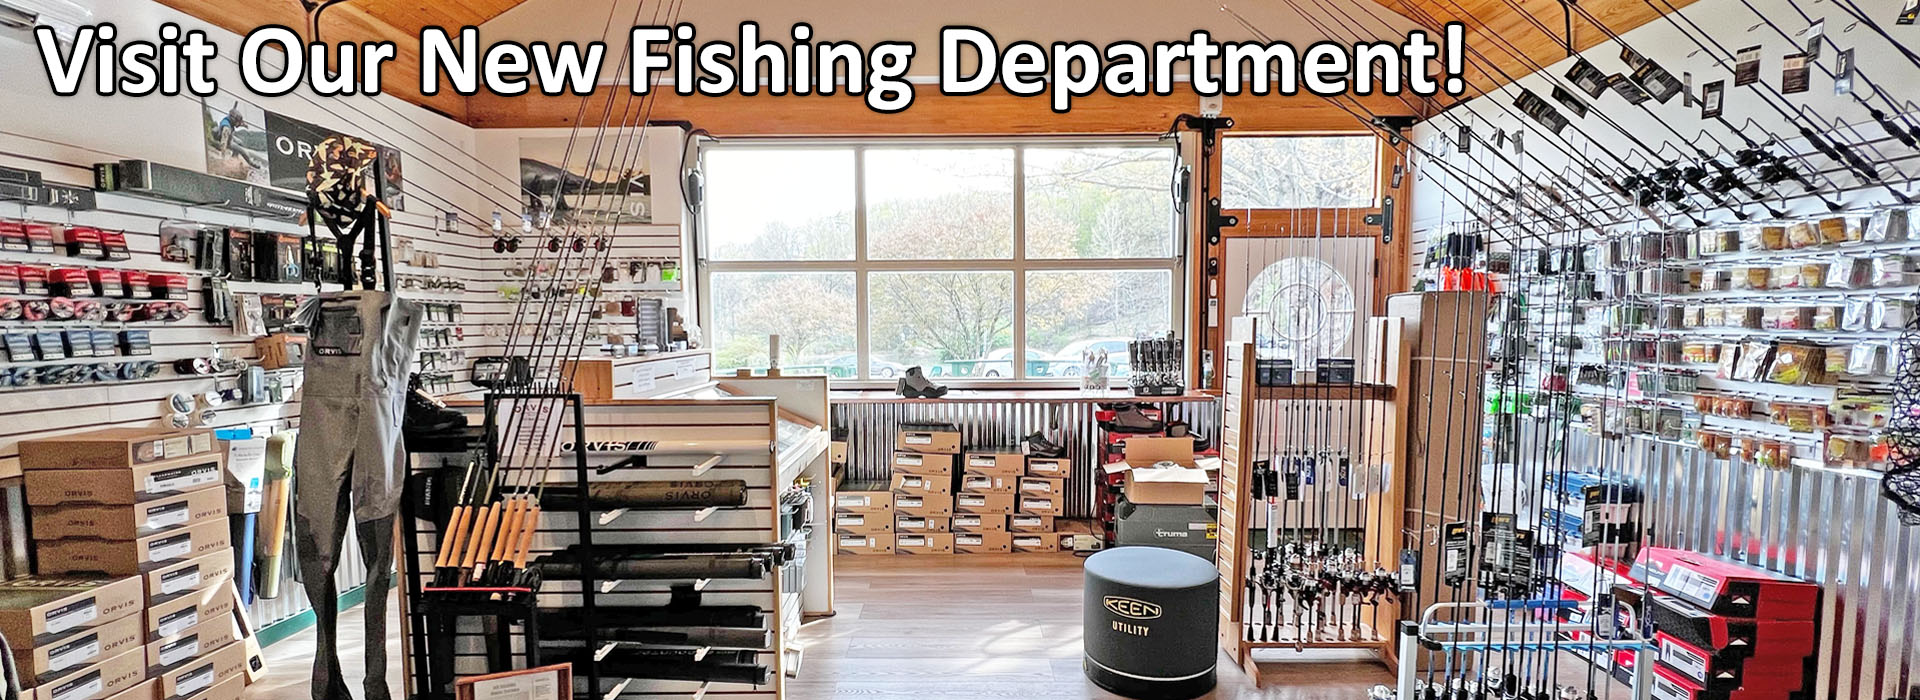 Visit Our New Fishing Department